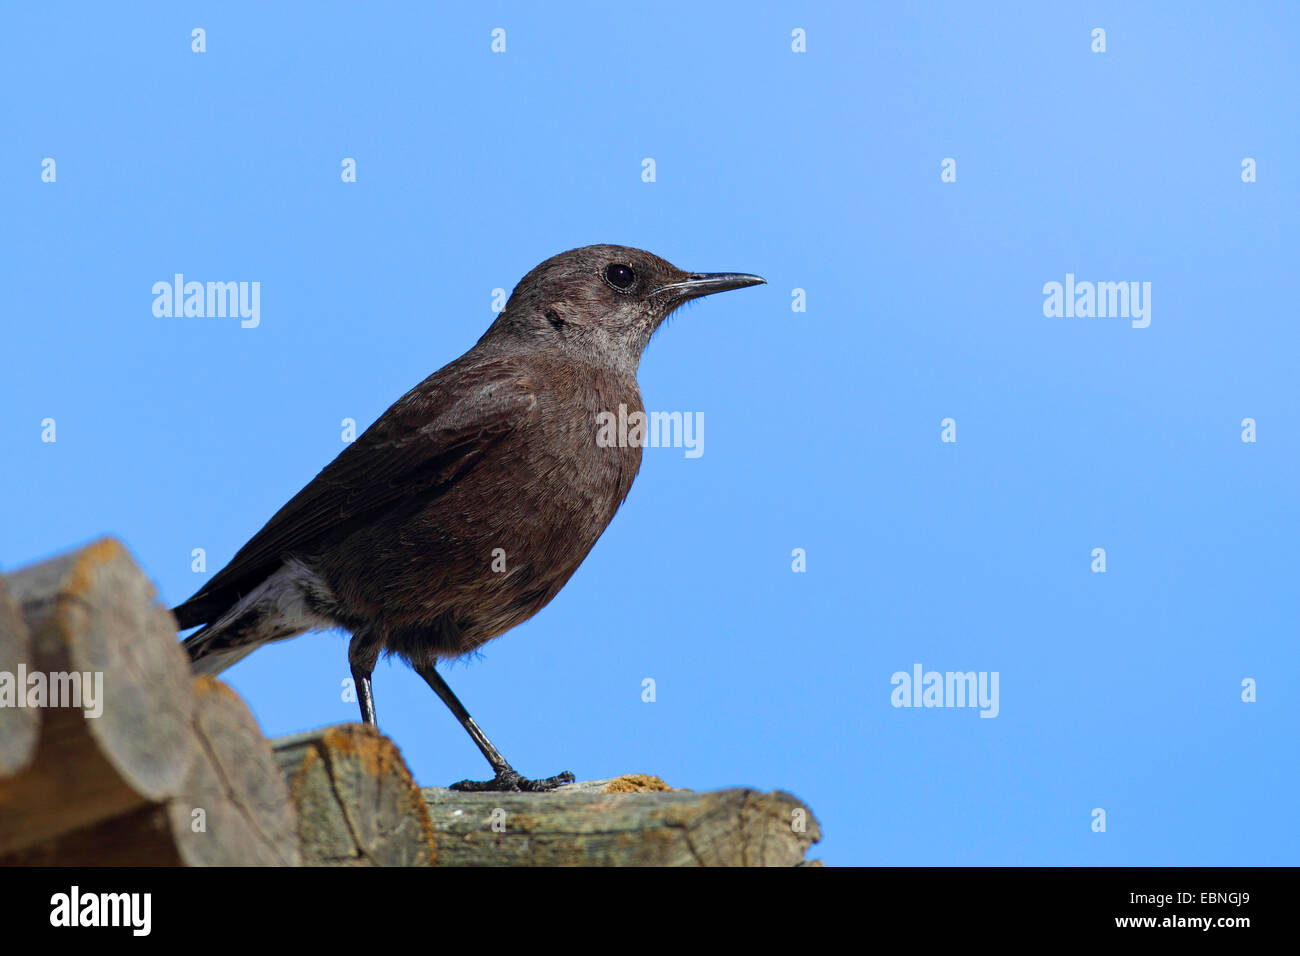 mountain wheatear (Oenanthe monticola), female sitting on a wooden stake, South Africa, Northern Cape Stock Photo